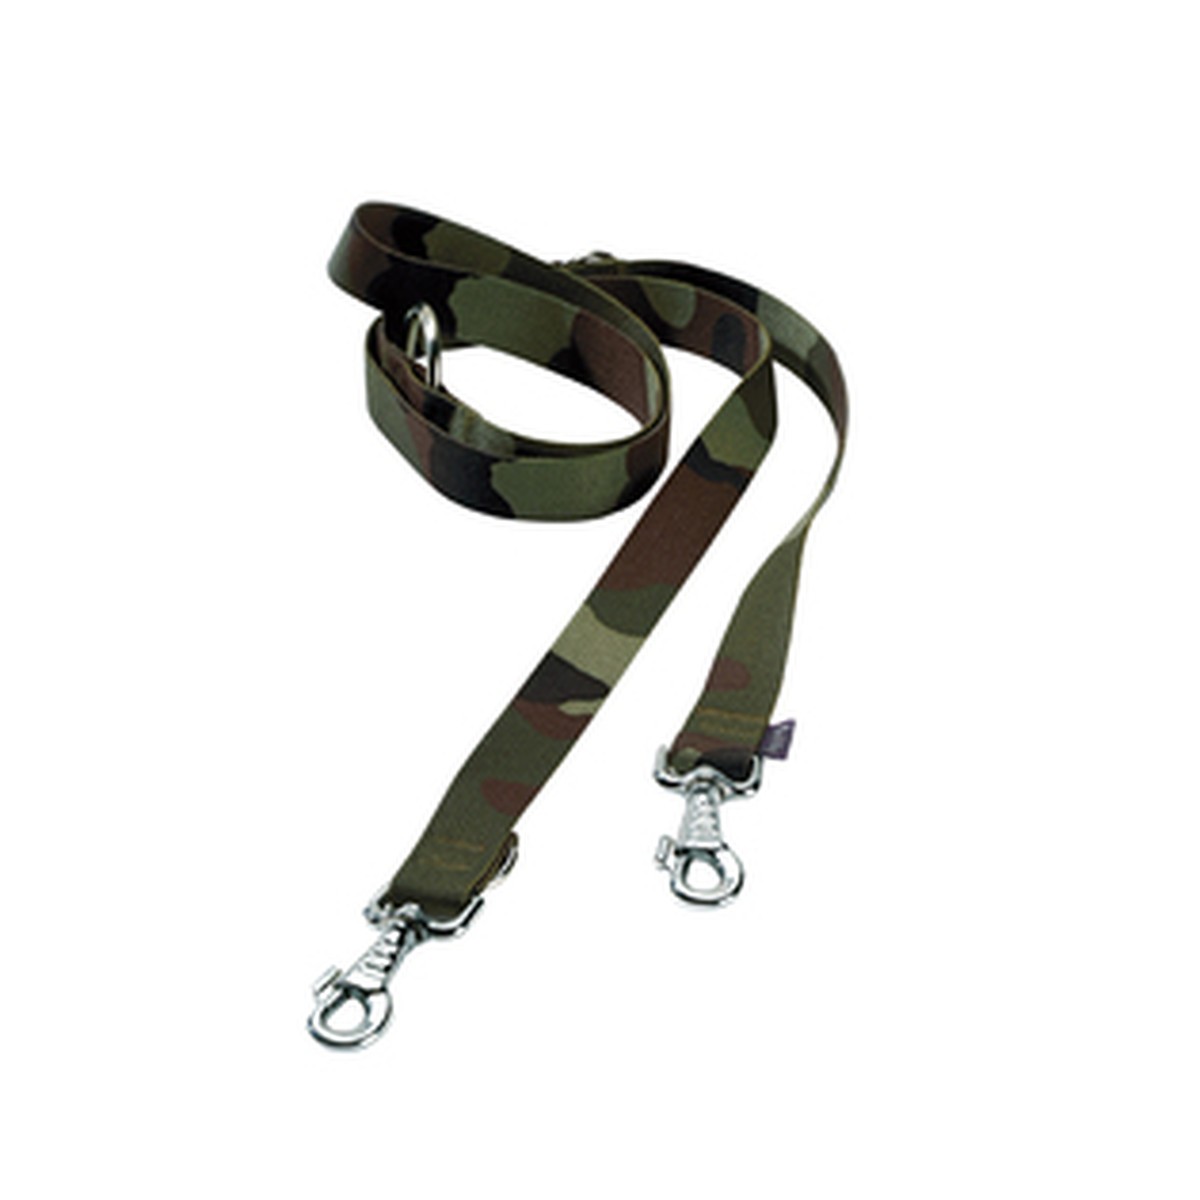 Bobby camouflage Laisse 3p. camouflage t16 Vert militaire 16